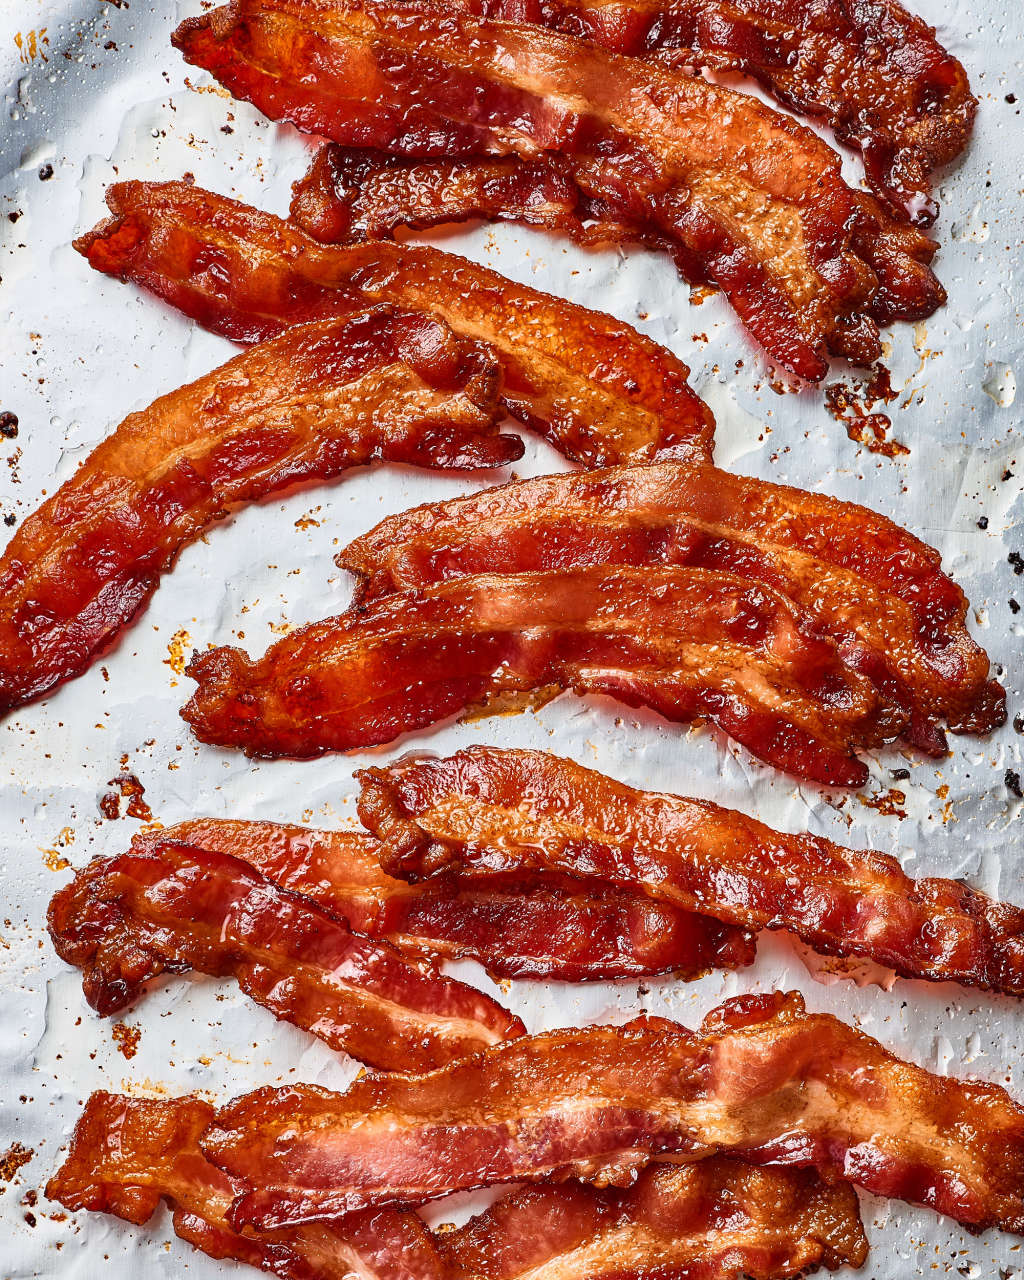 How Many Calories In 4 Slices Of Bacon | Examples and Forms